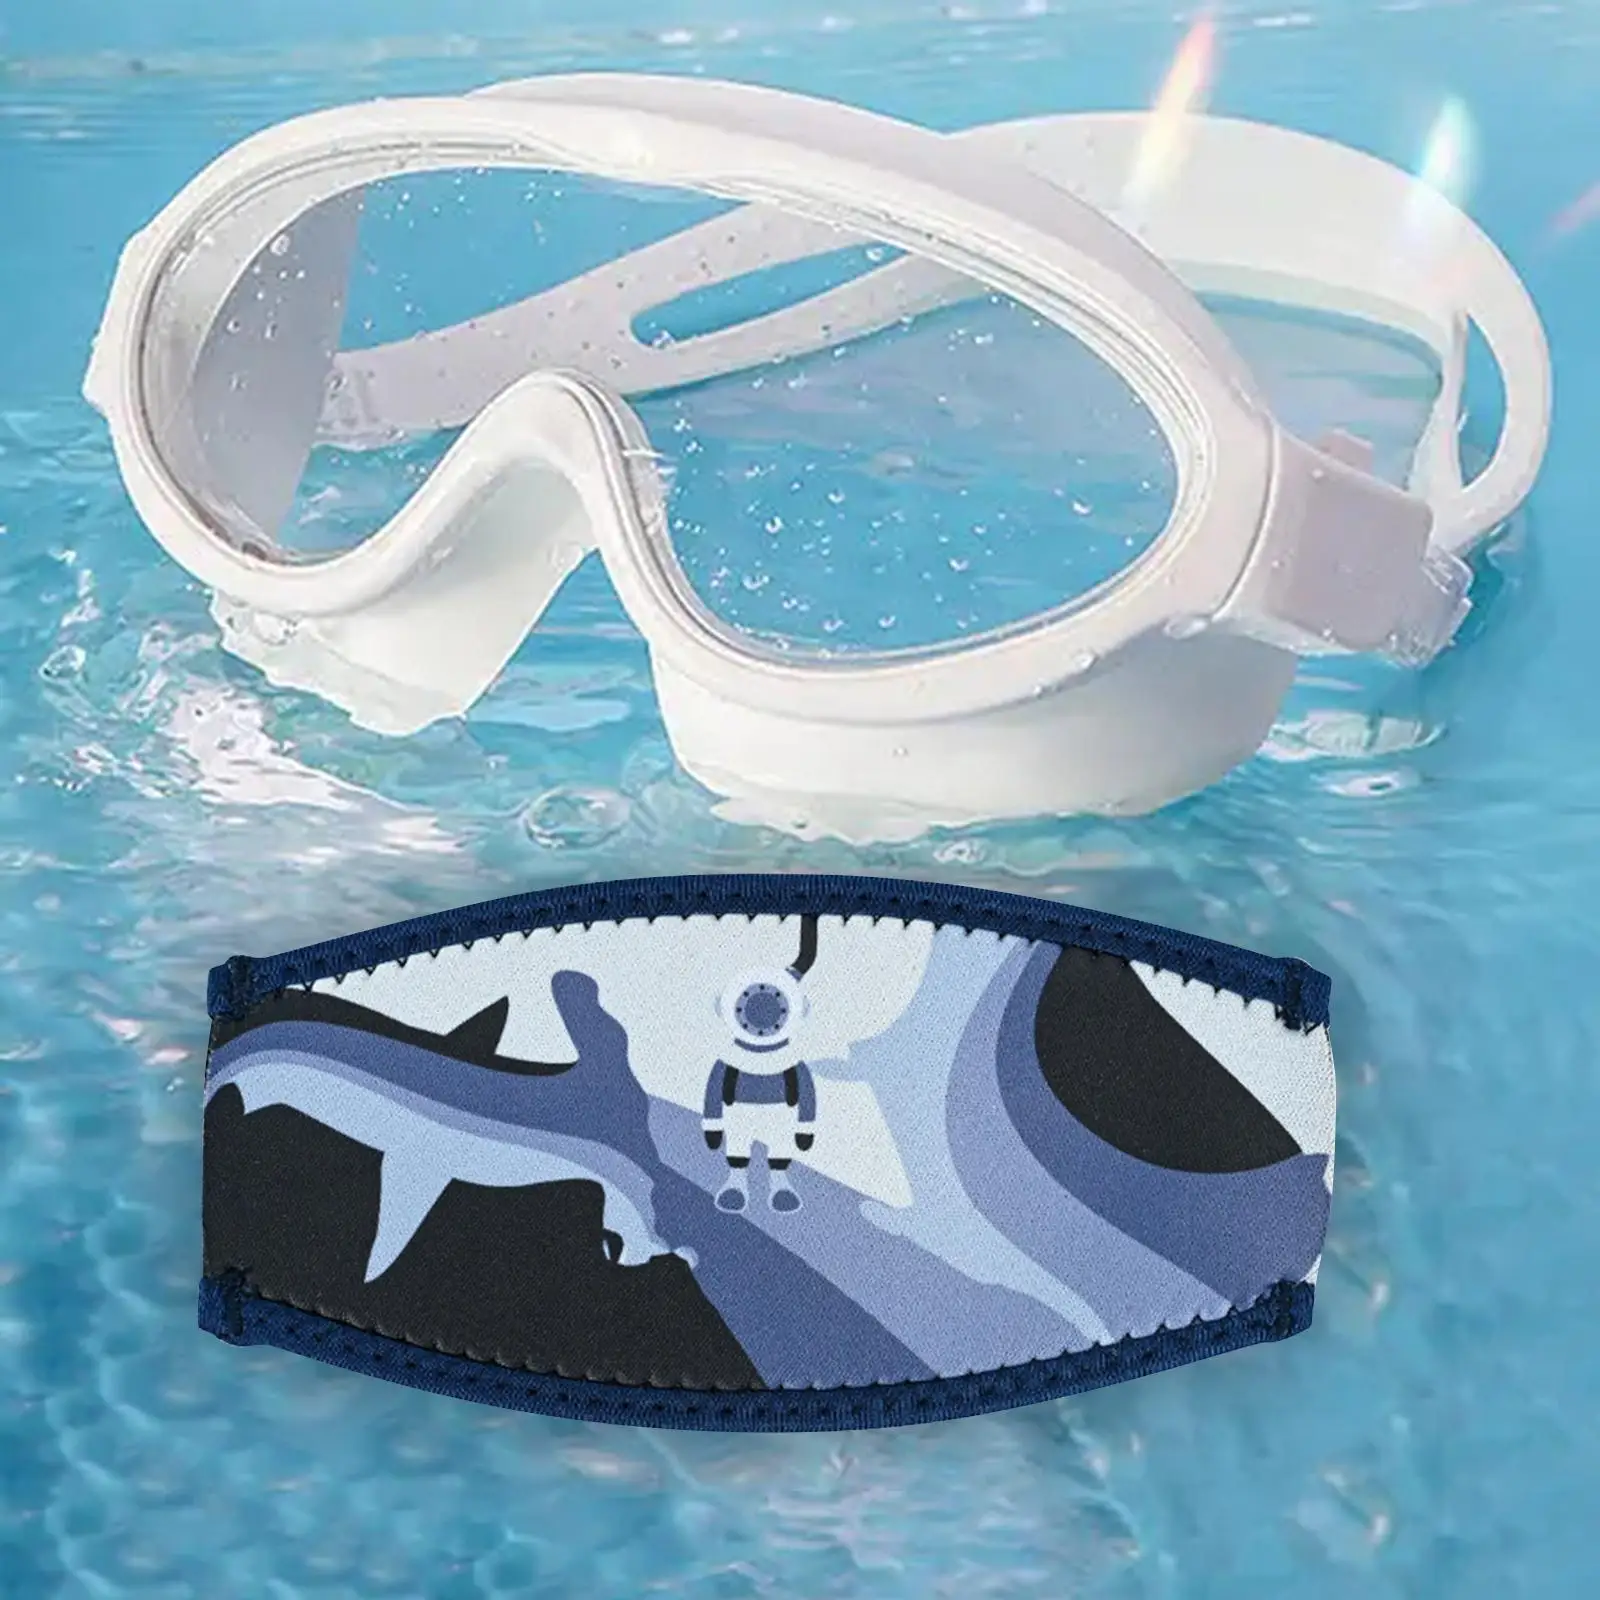 Non Slip Diving Mask Strap Cover, Diving Mask Slap Straps Replace for Dive and Snorkel Masks, Dive Wrapping Strap for Swimming